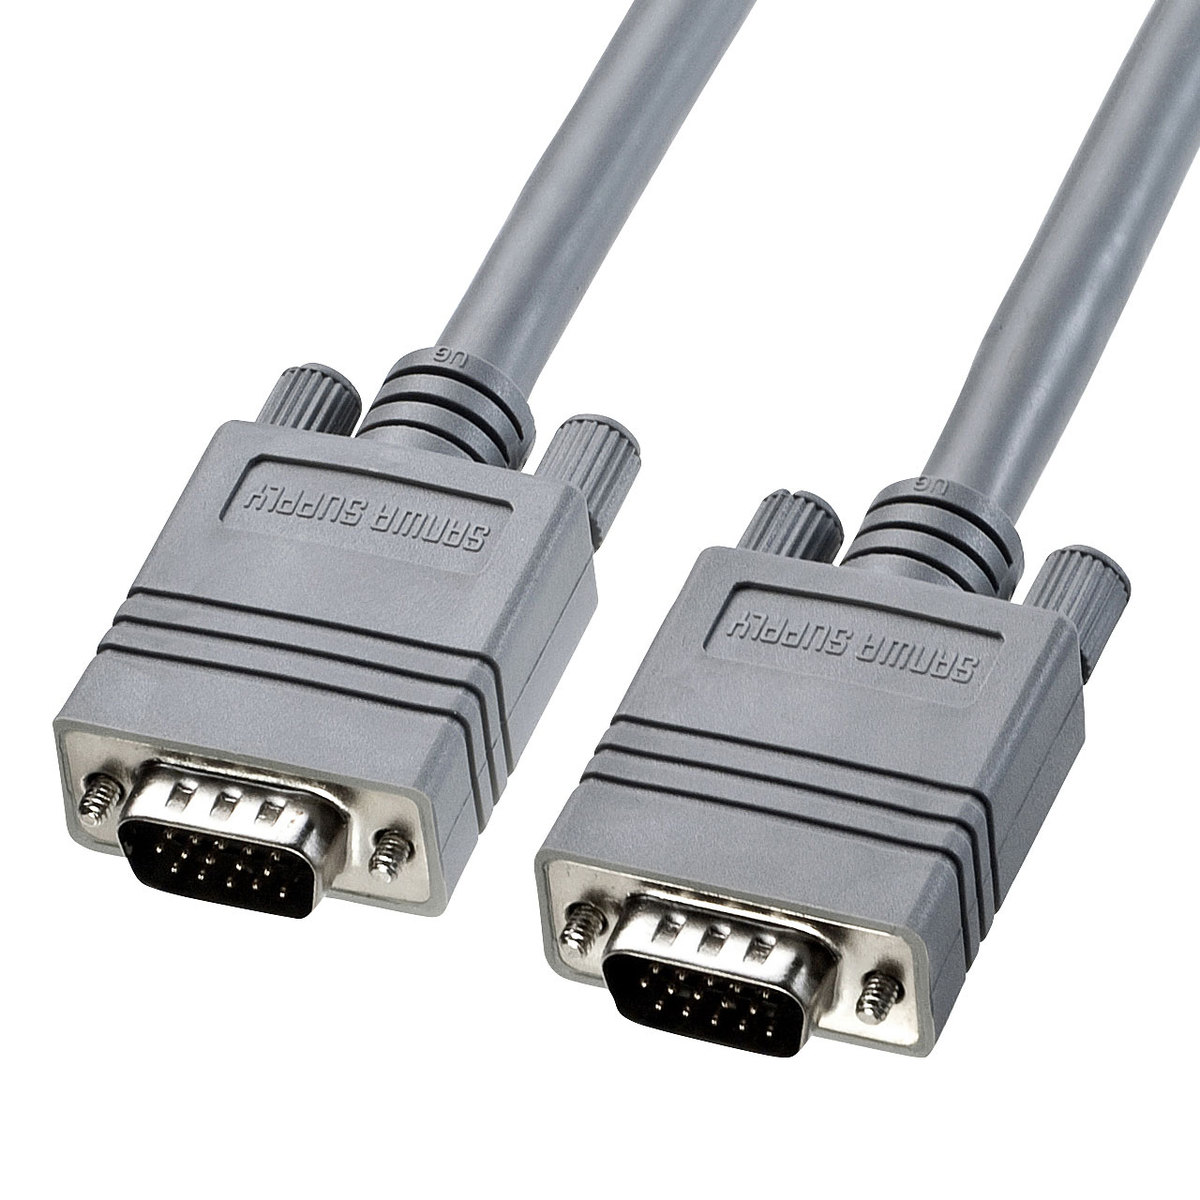 Display Cable (Compound Coaxial / Analog RGB), KB-CHD Series